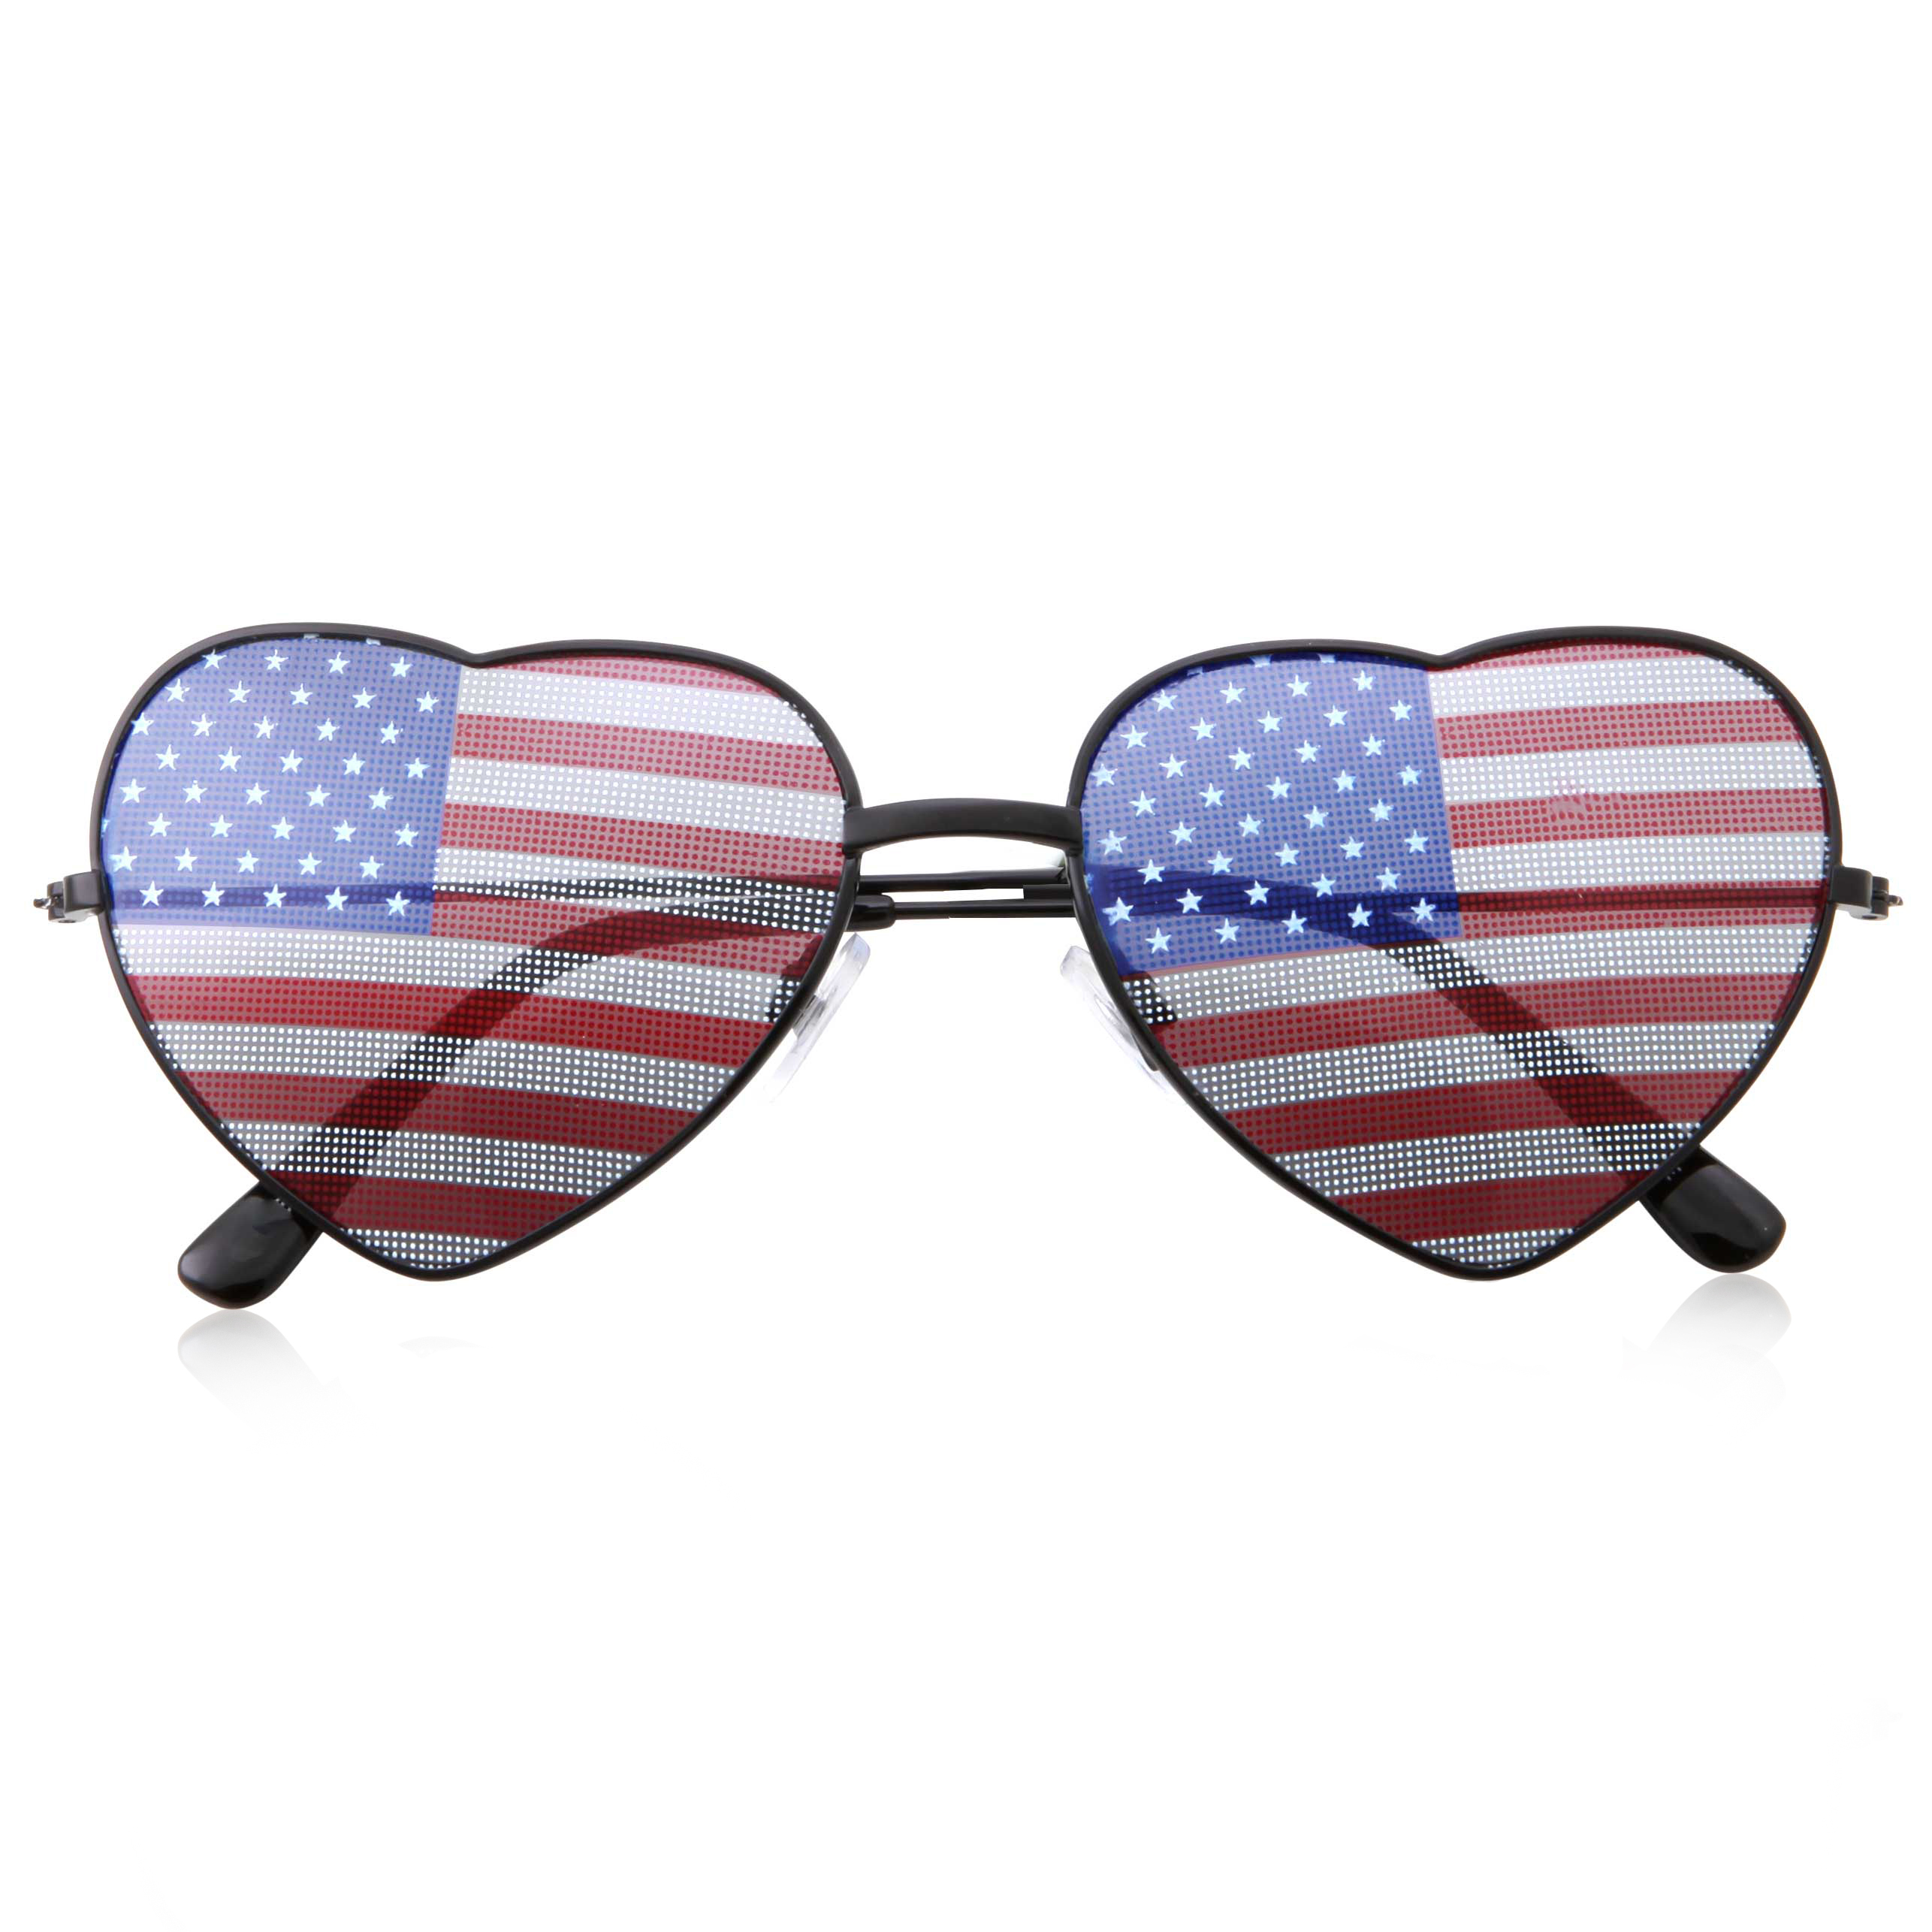 grinderPUNCH Women's Heart Shaped American Flag Cute Sunglasses US Shades - image 1 of 5